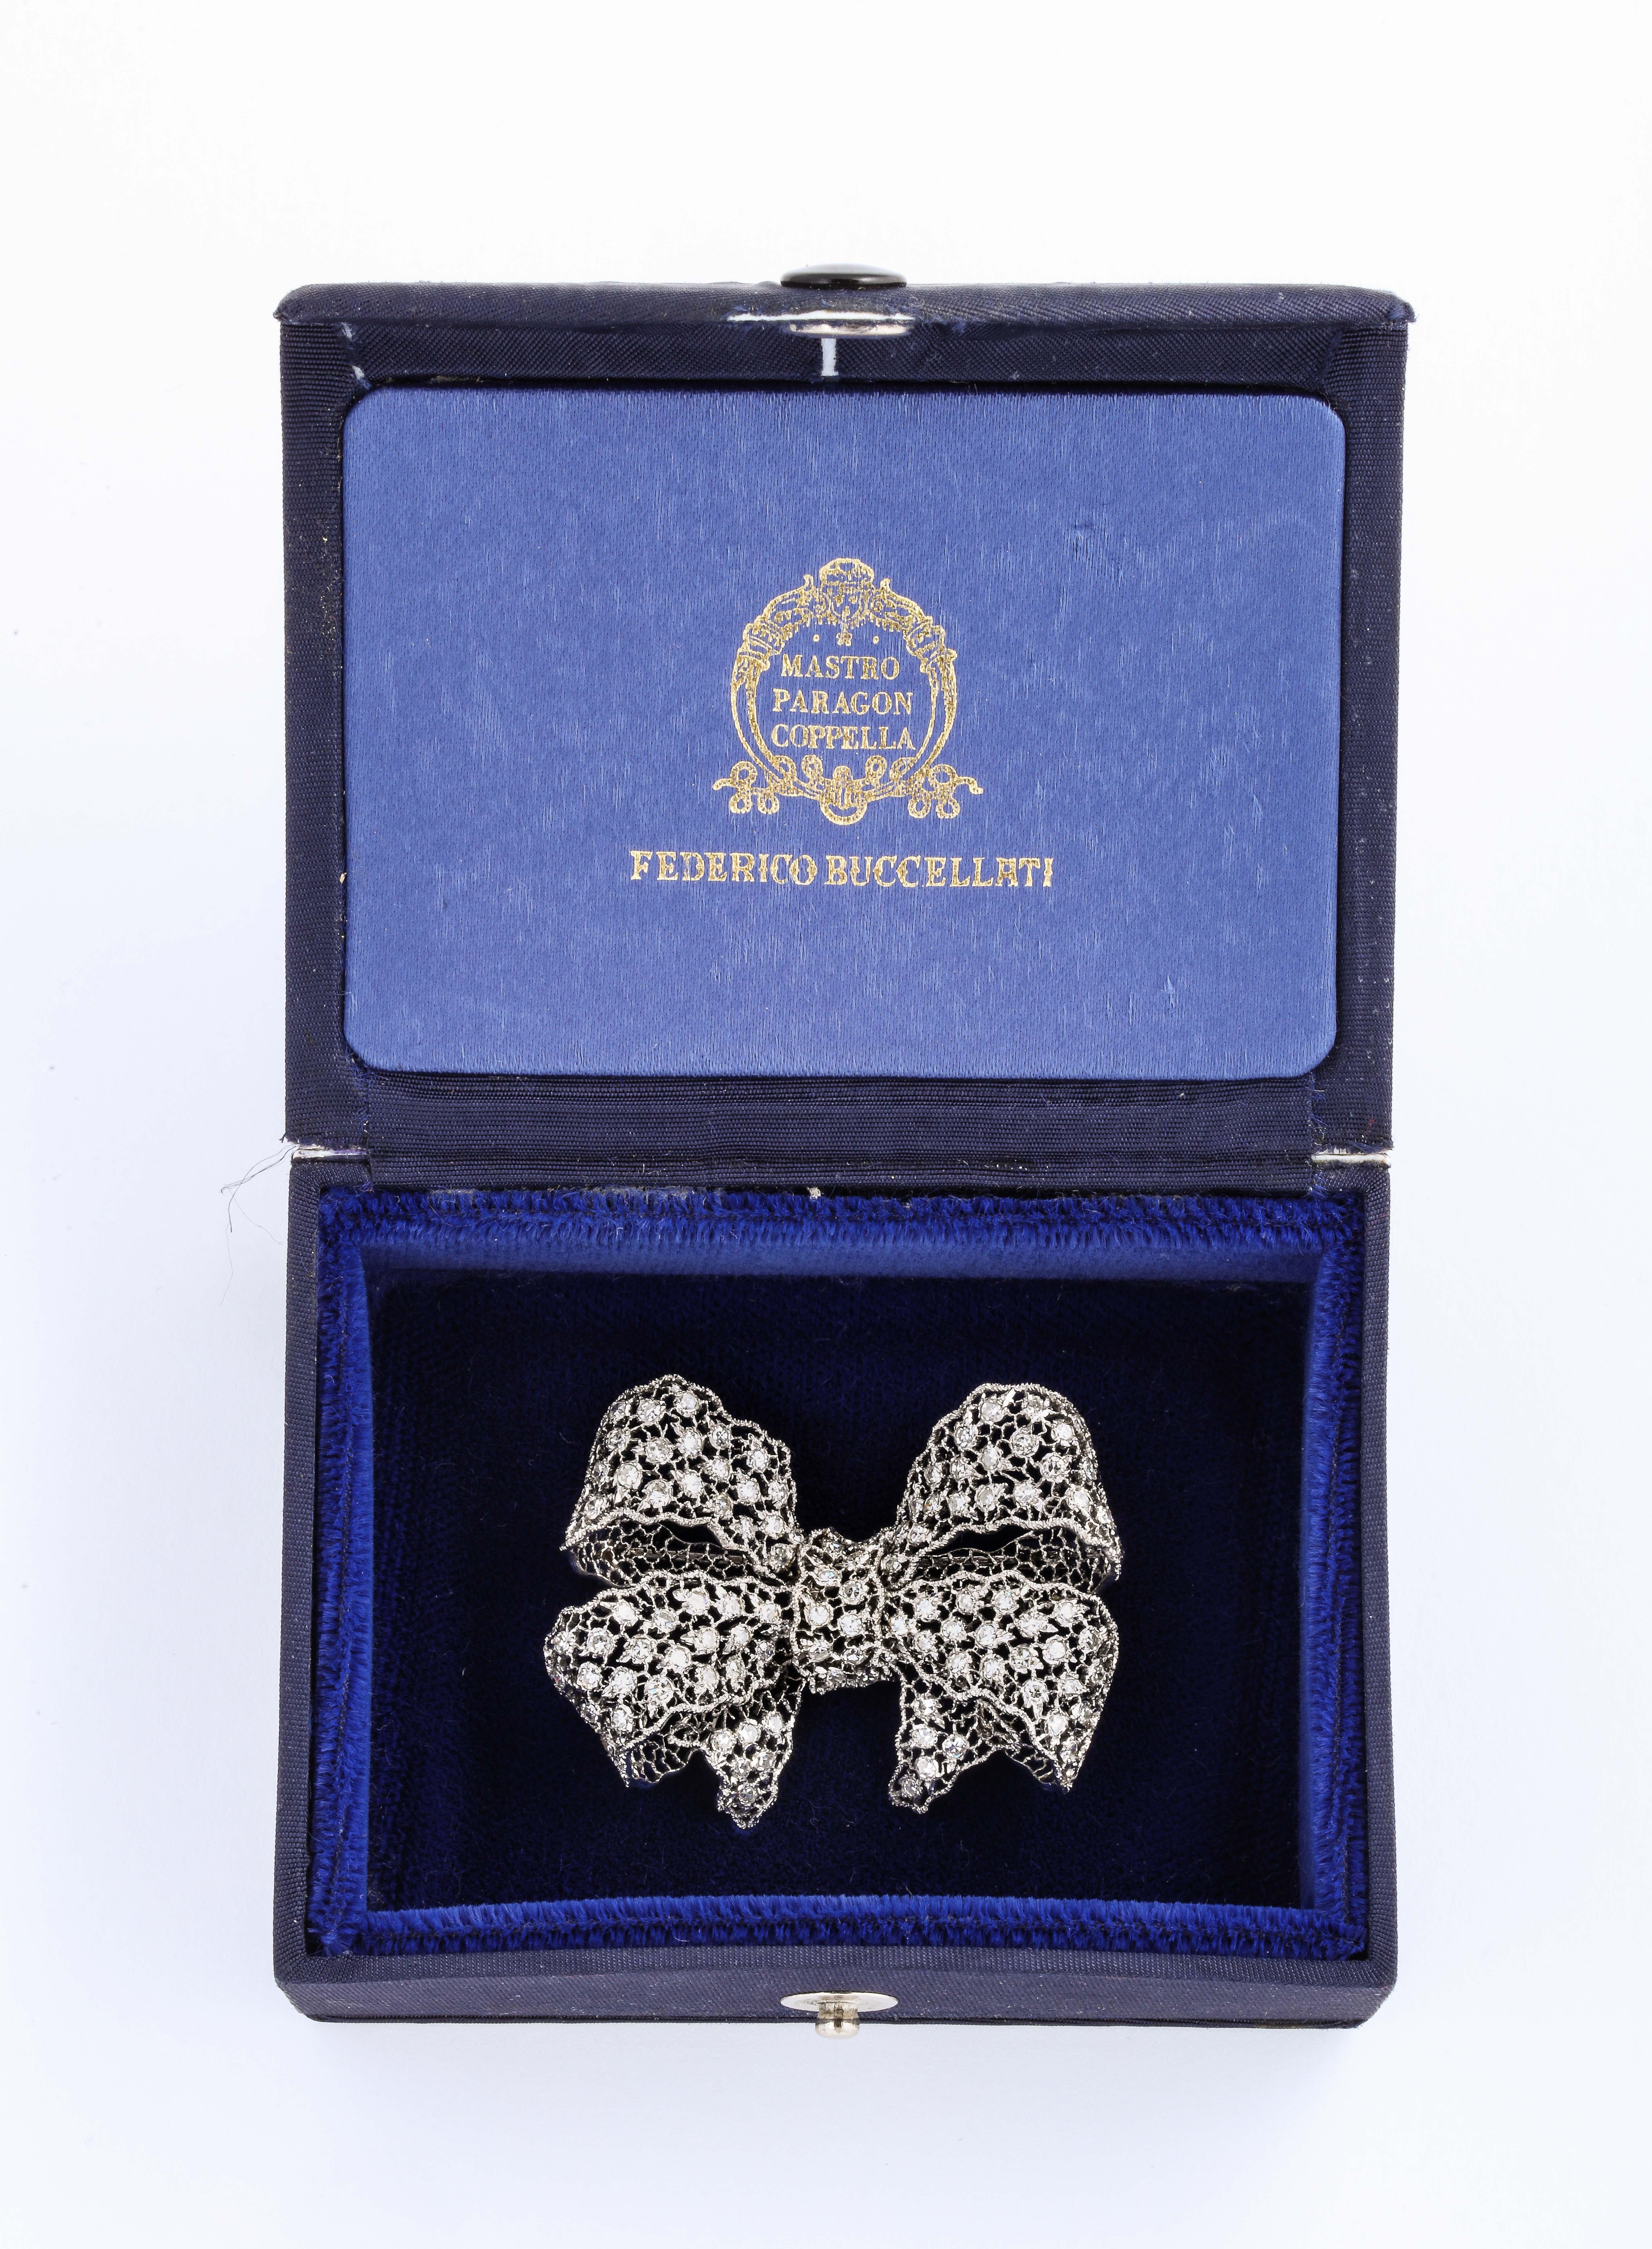 A lovely Florentine Lace Pin by Federico Buccellati, created circa 1940 in fine white single cut diamonds of 3.75 tw, set in 18k white gold. Marked Buccellati 750, it comes with its original box.

Material:
18K White Gold 6.4 dwt

Stones:
Fine White